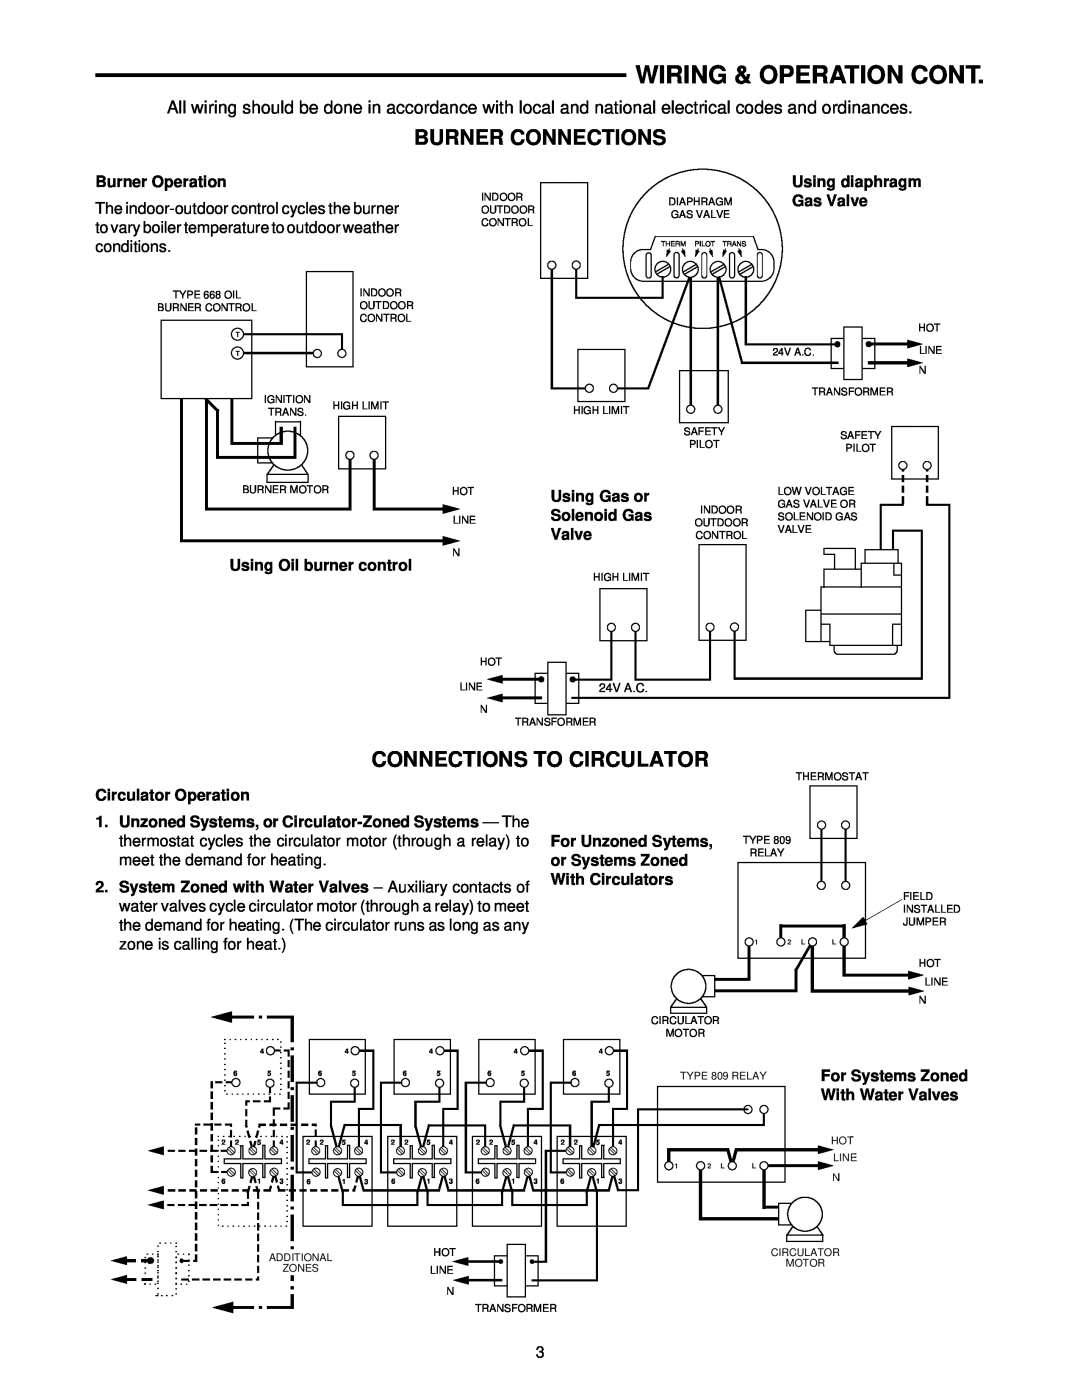 White Rodgers 1050 Wiring & Operation Cont, Burner Connections, Connections To Circulator, Burner Operation, Using Gas or 